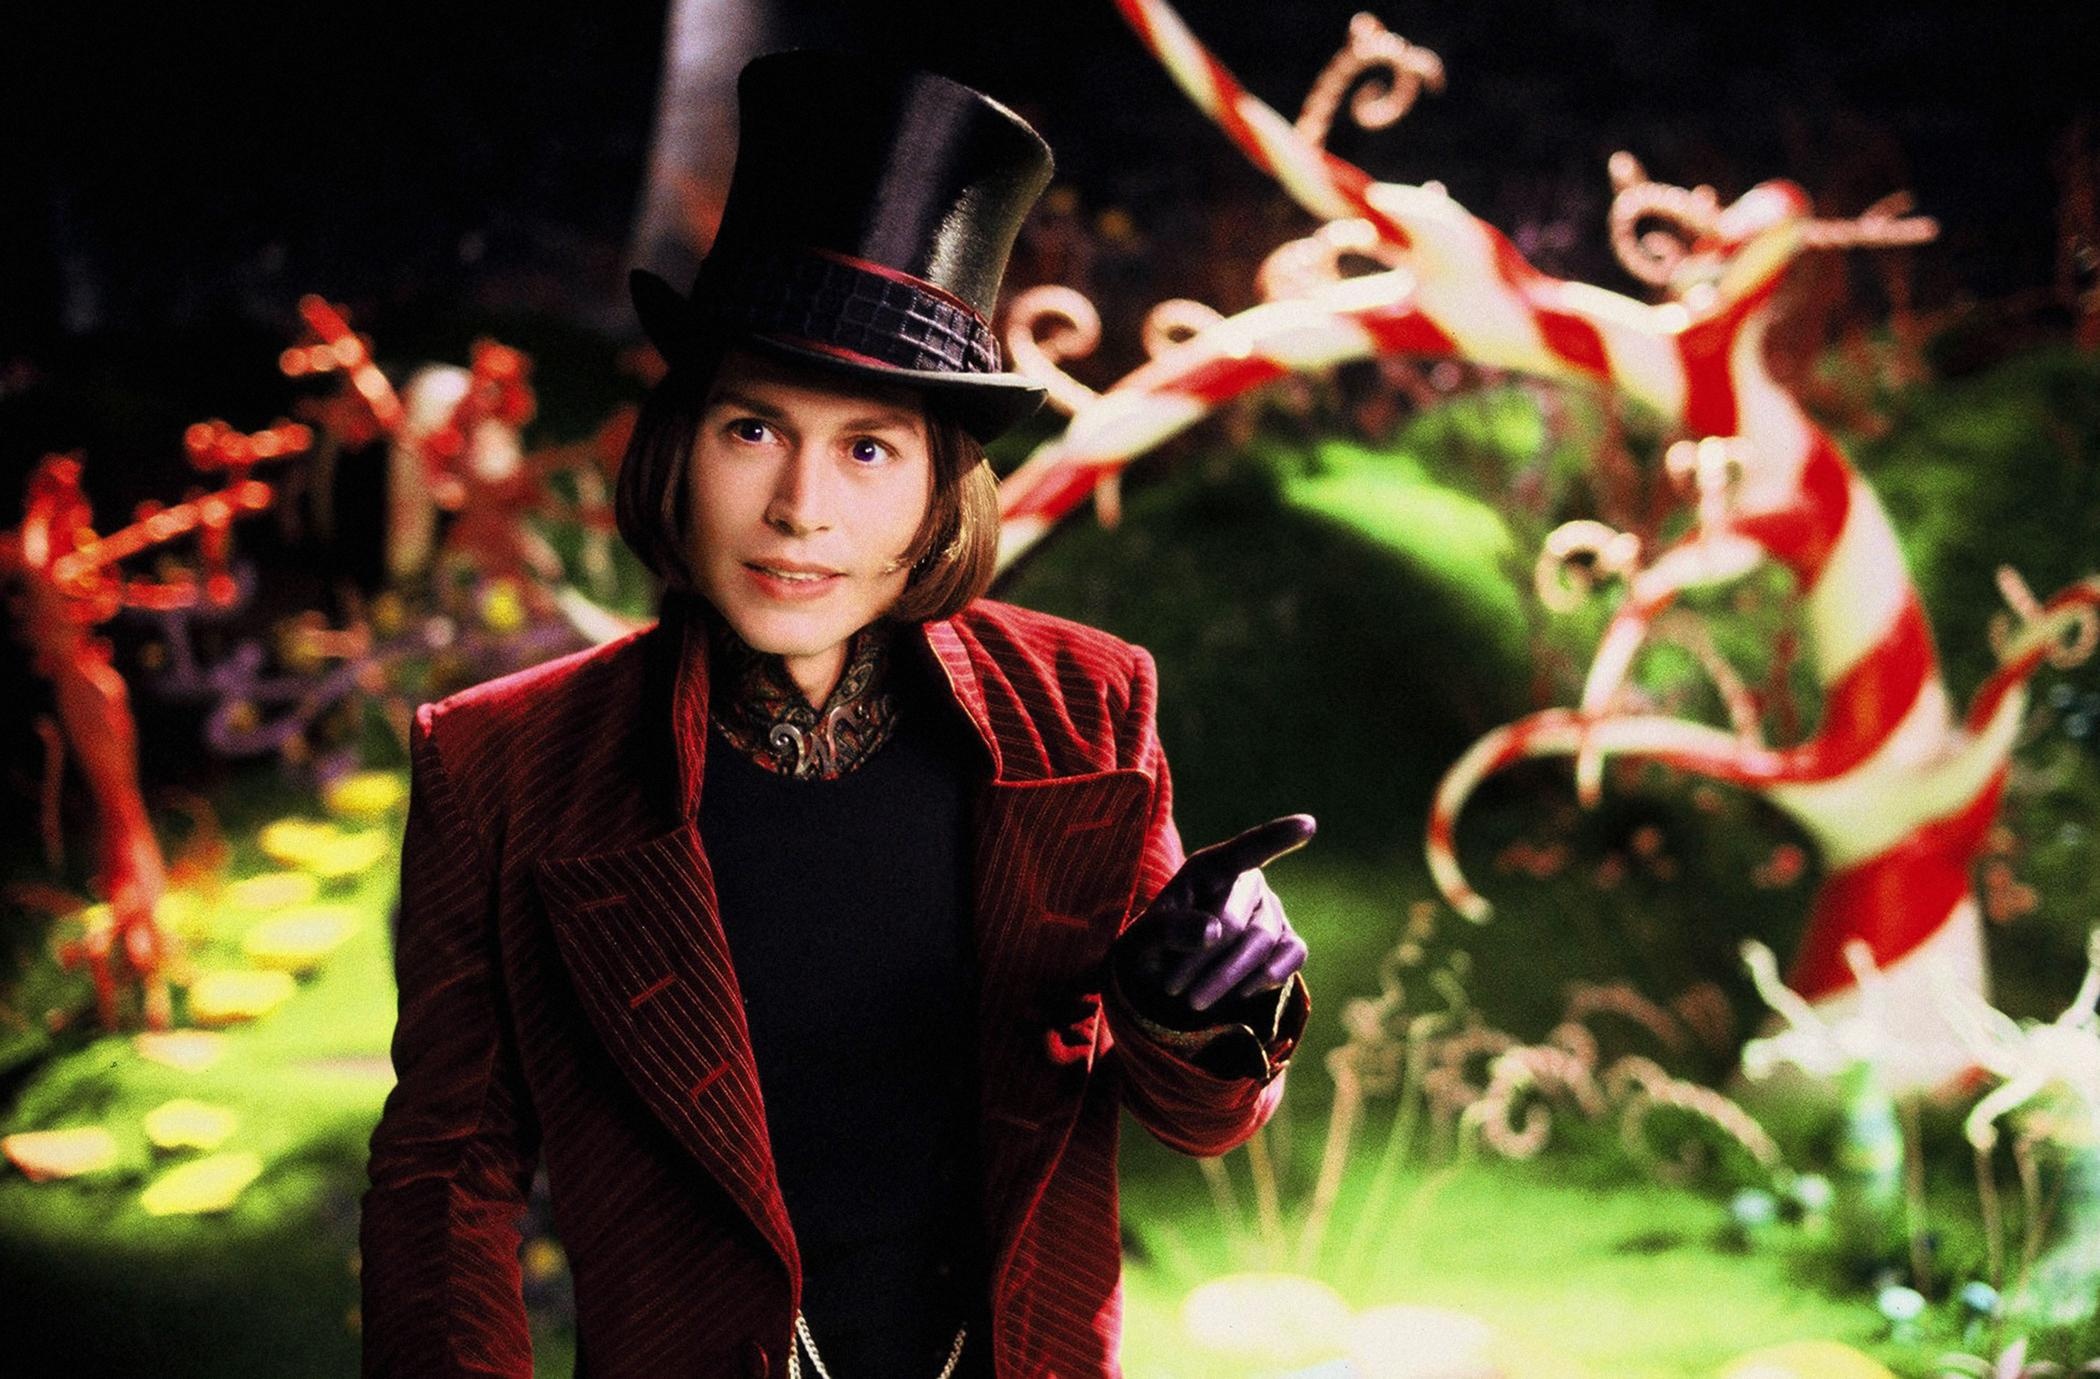 Willy Wonka, Top free wallpapers, Fantasy adventure, Chocolate factory, 2100x1380 HD Desktop